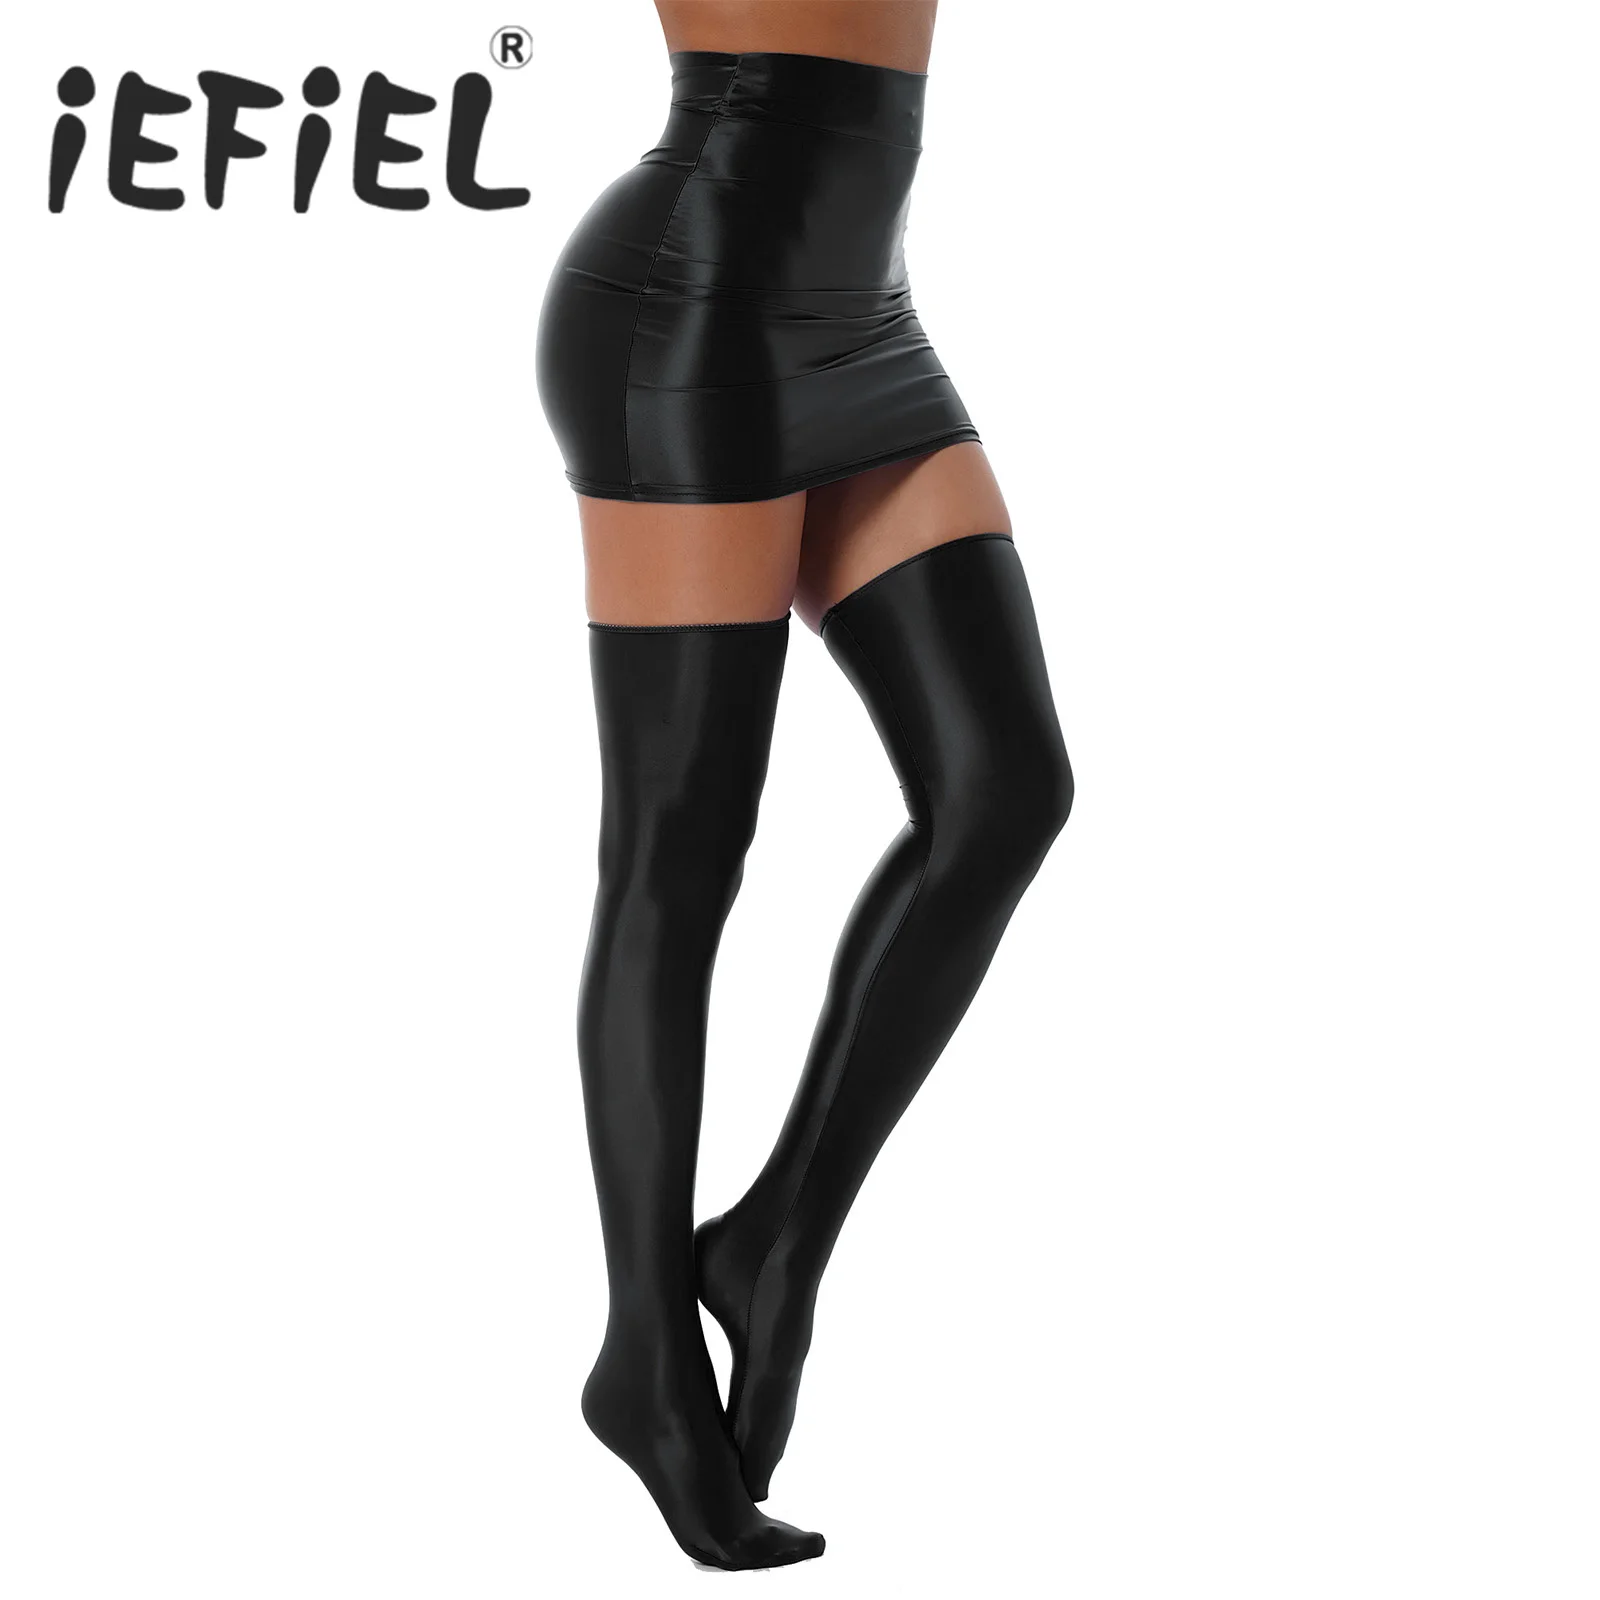 

Women Sexy Mini Skirts Patent Leather Bodycon Pencil Skirt Nightclub Party Performance Costumes Micro Miniskirt with Stockings